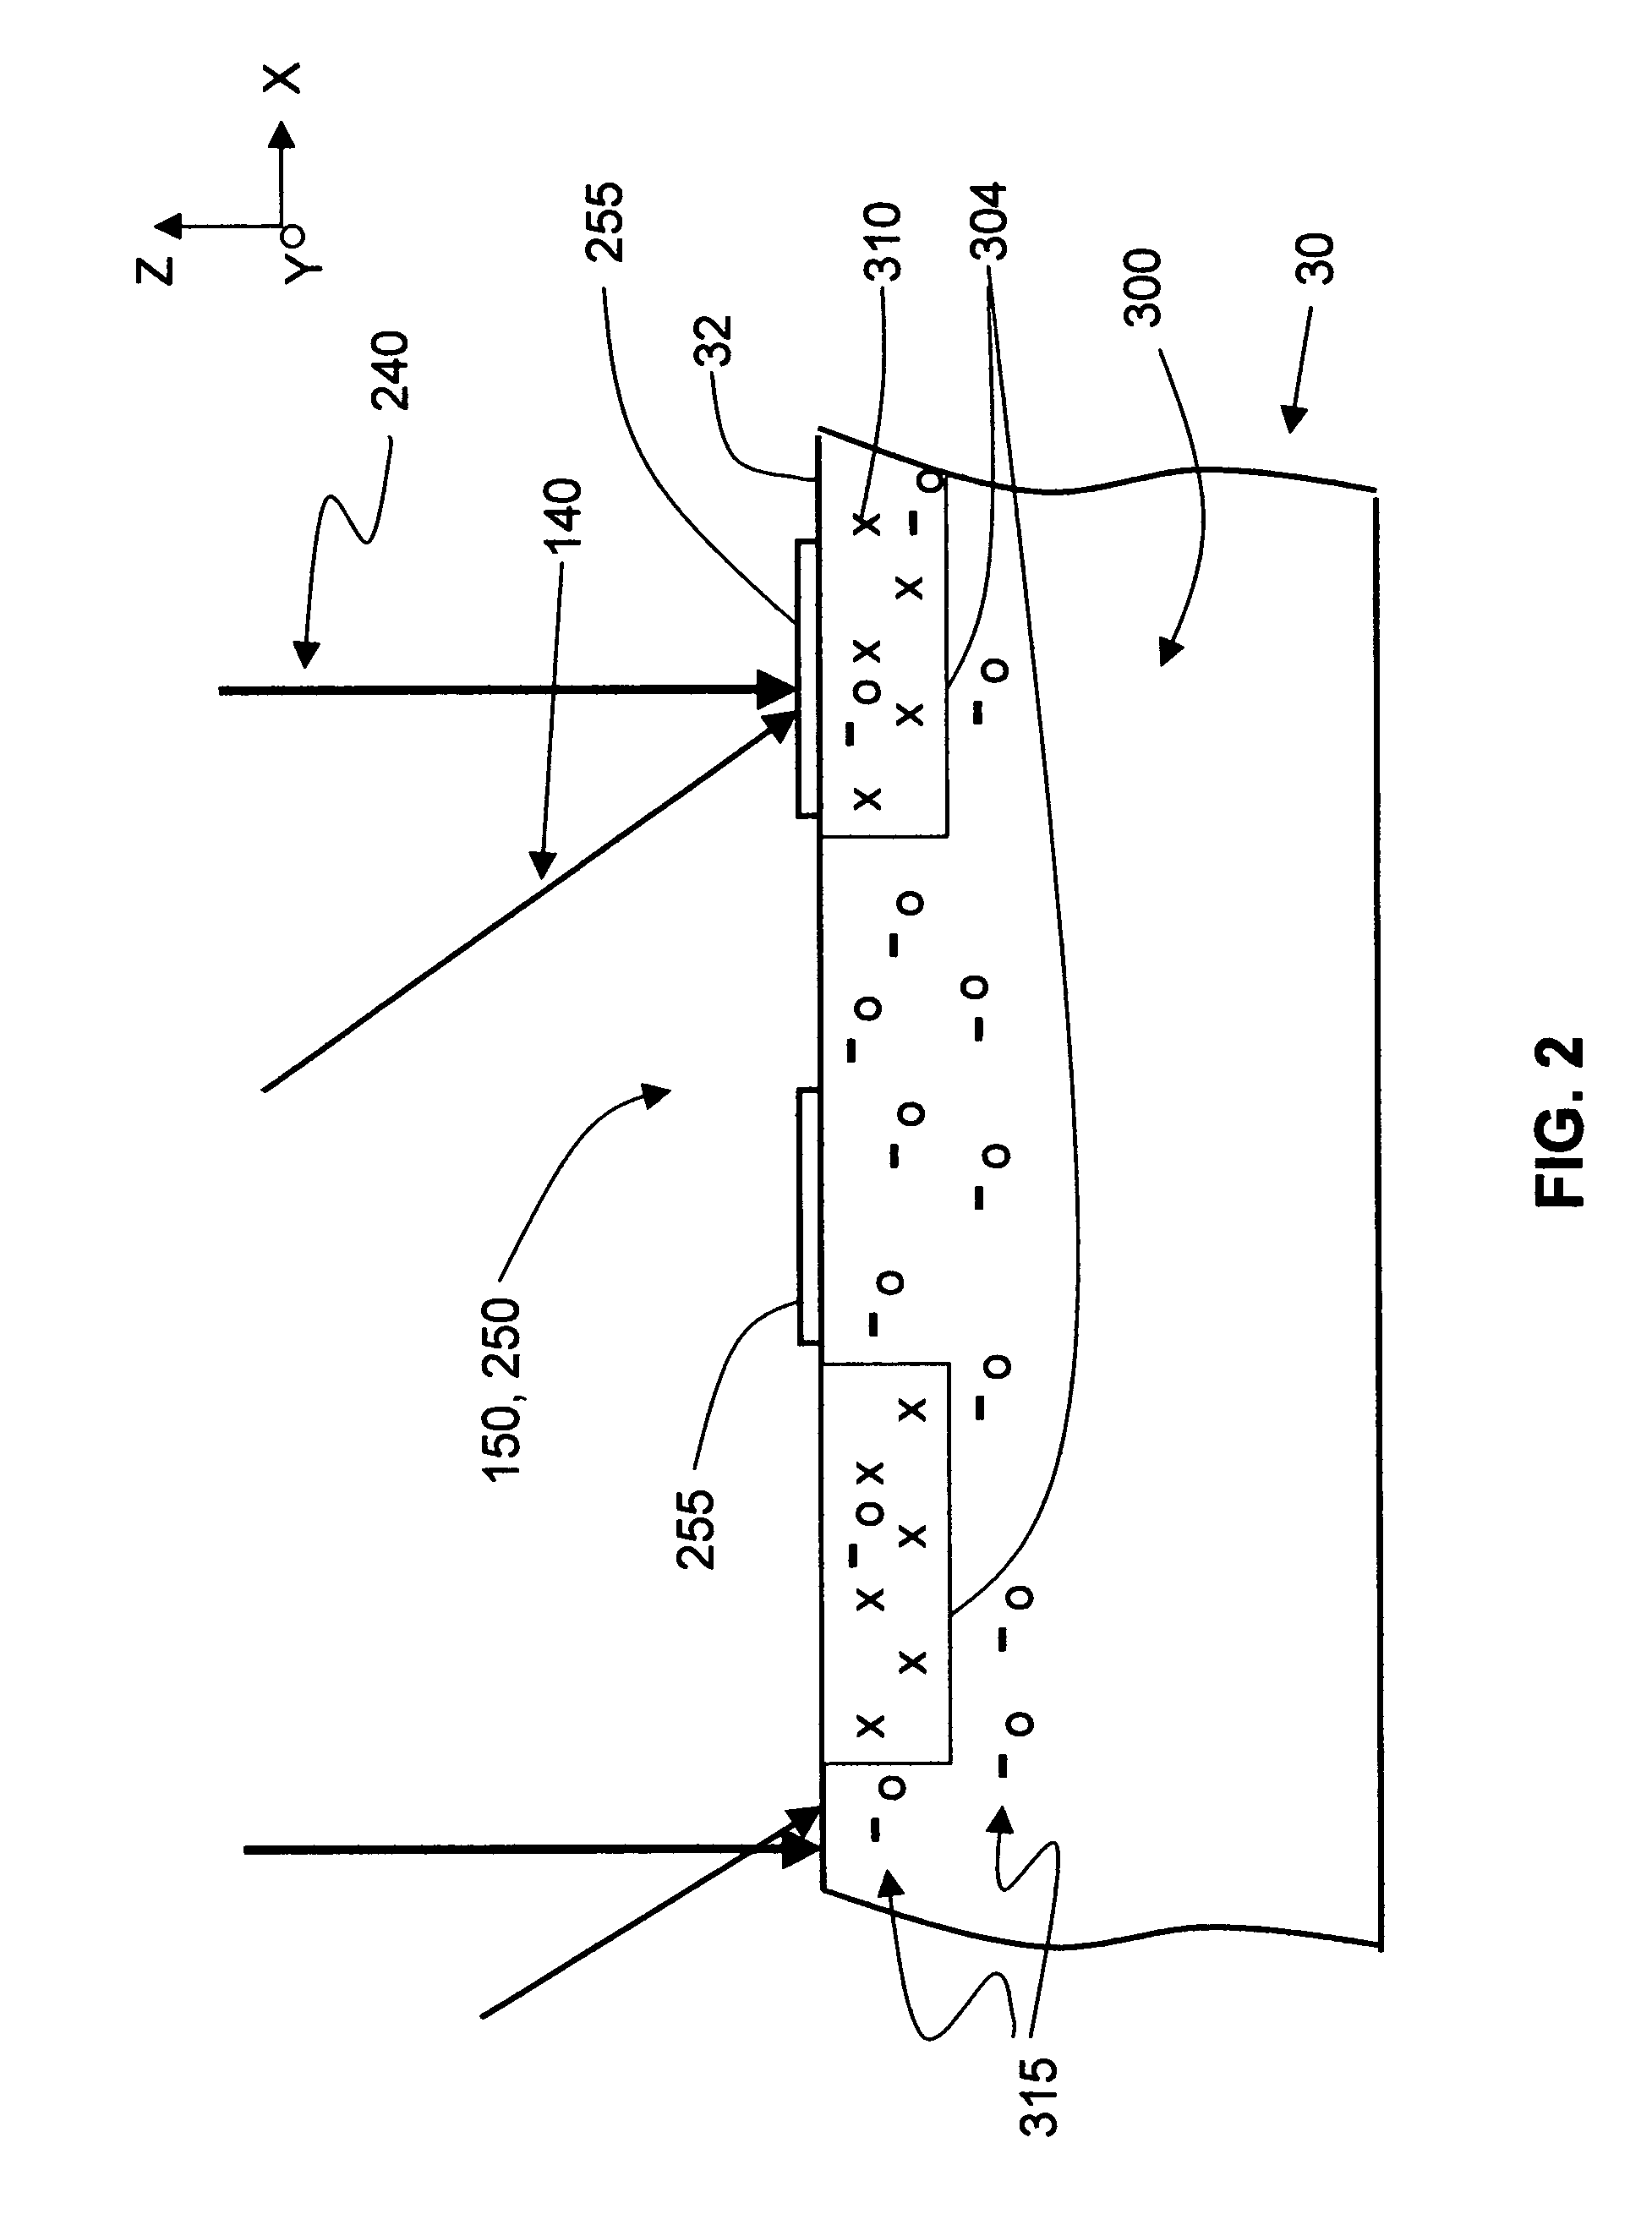 Apparatus and methods for thermally processing undoped and lightly doped substrates without pre-heating